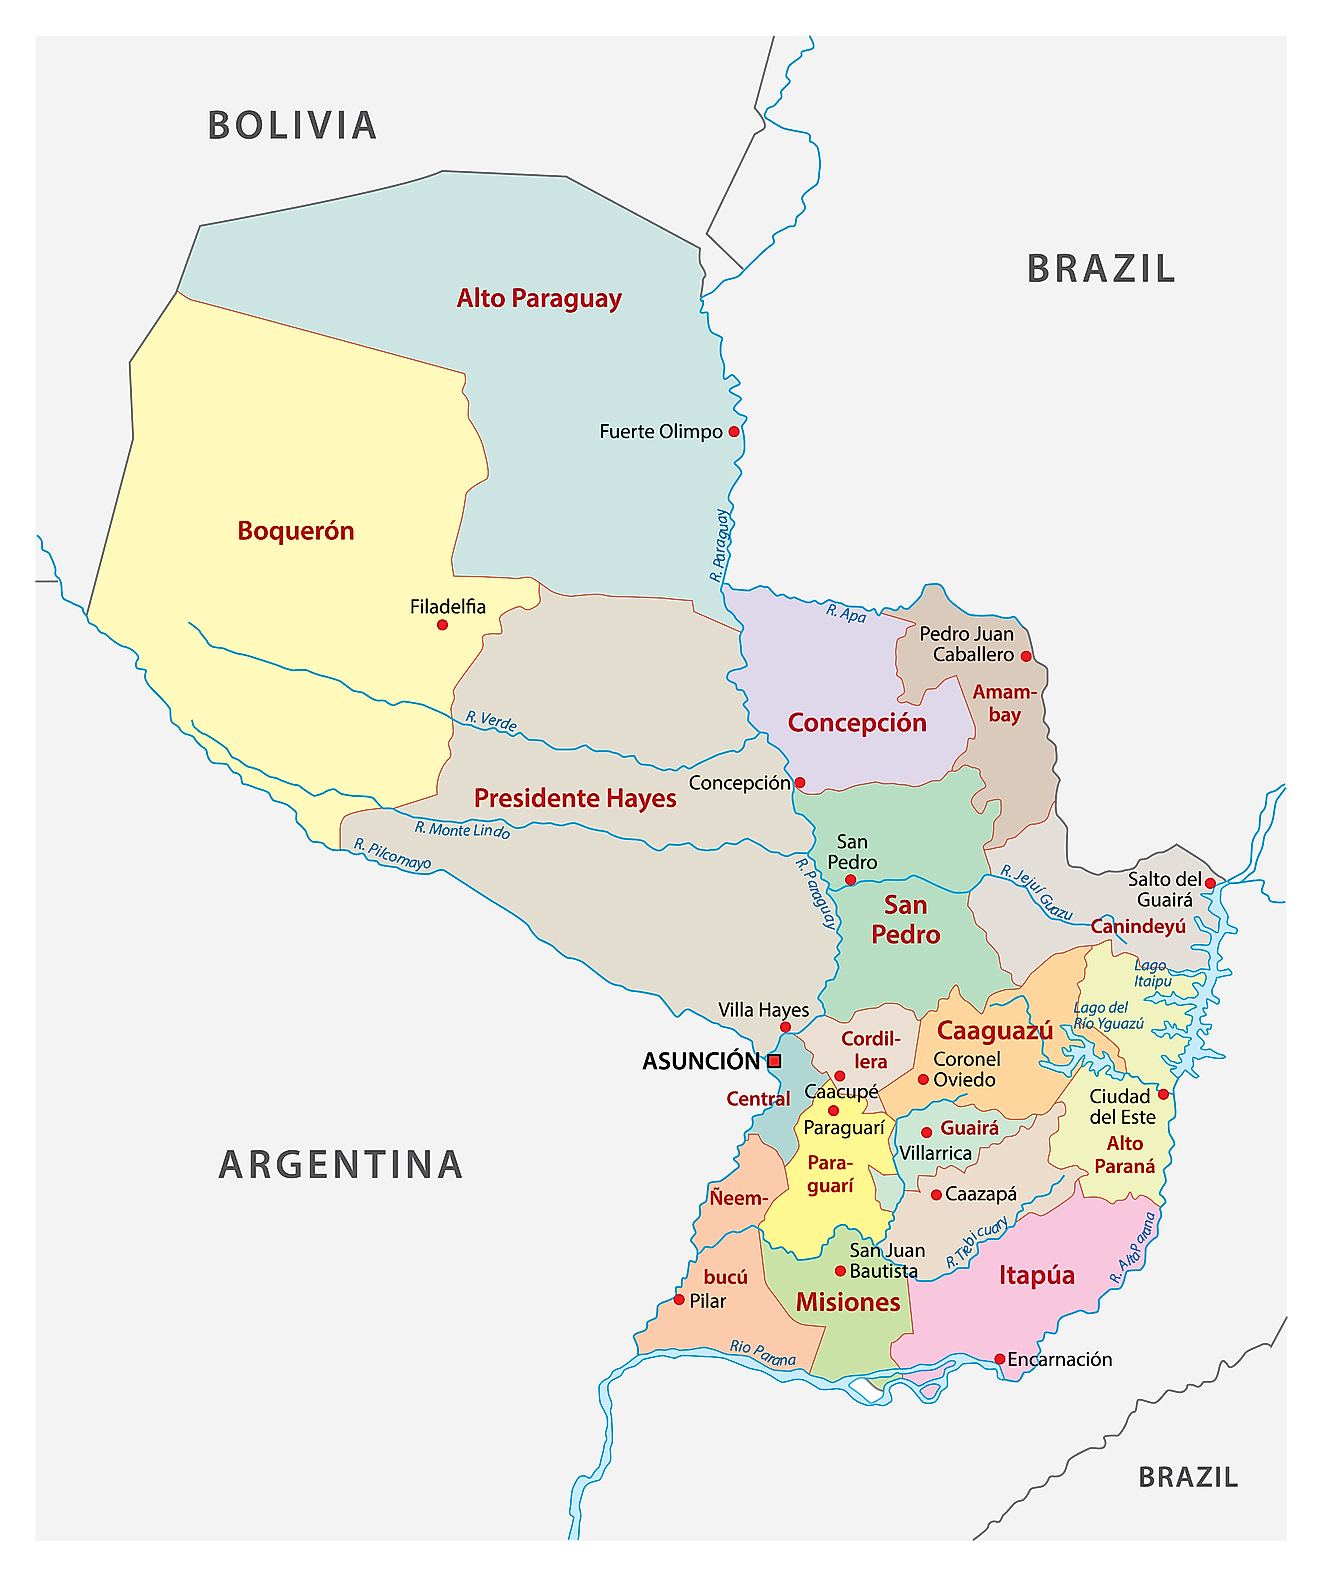 Political Map of Paraguay showing its 17 departments and the capital city of Asunción.